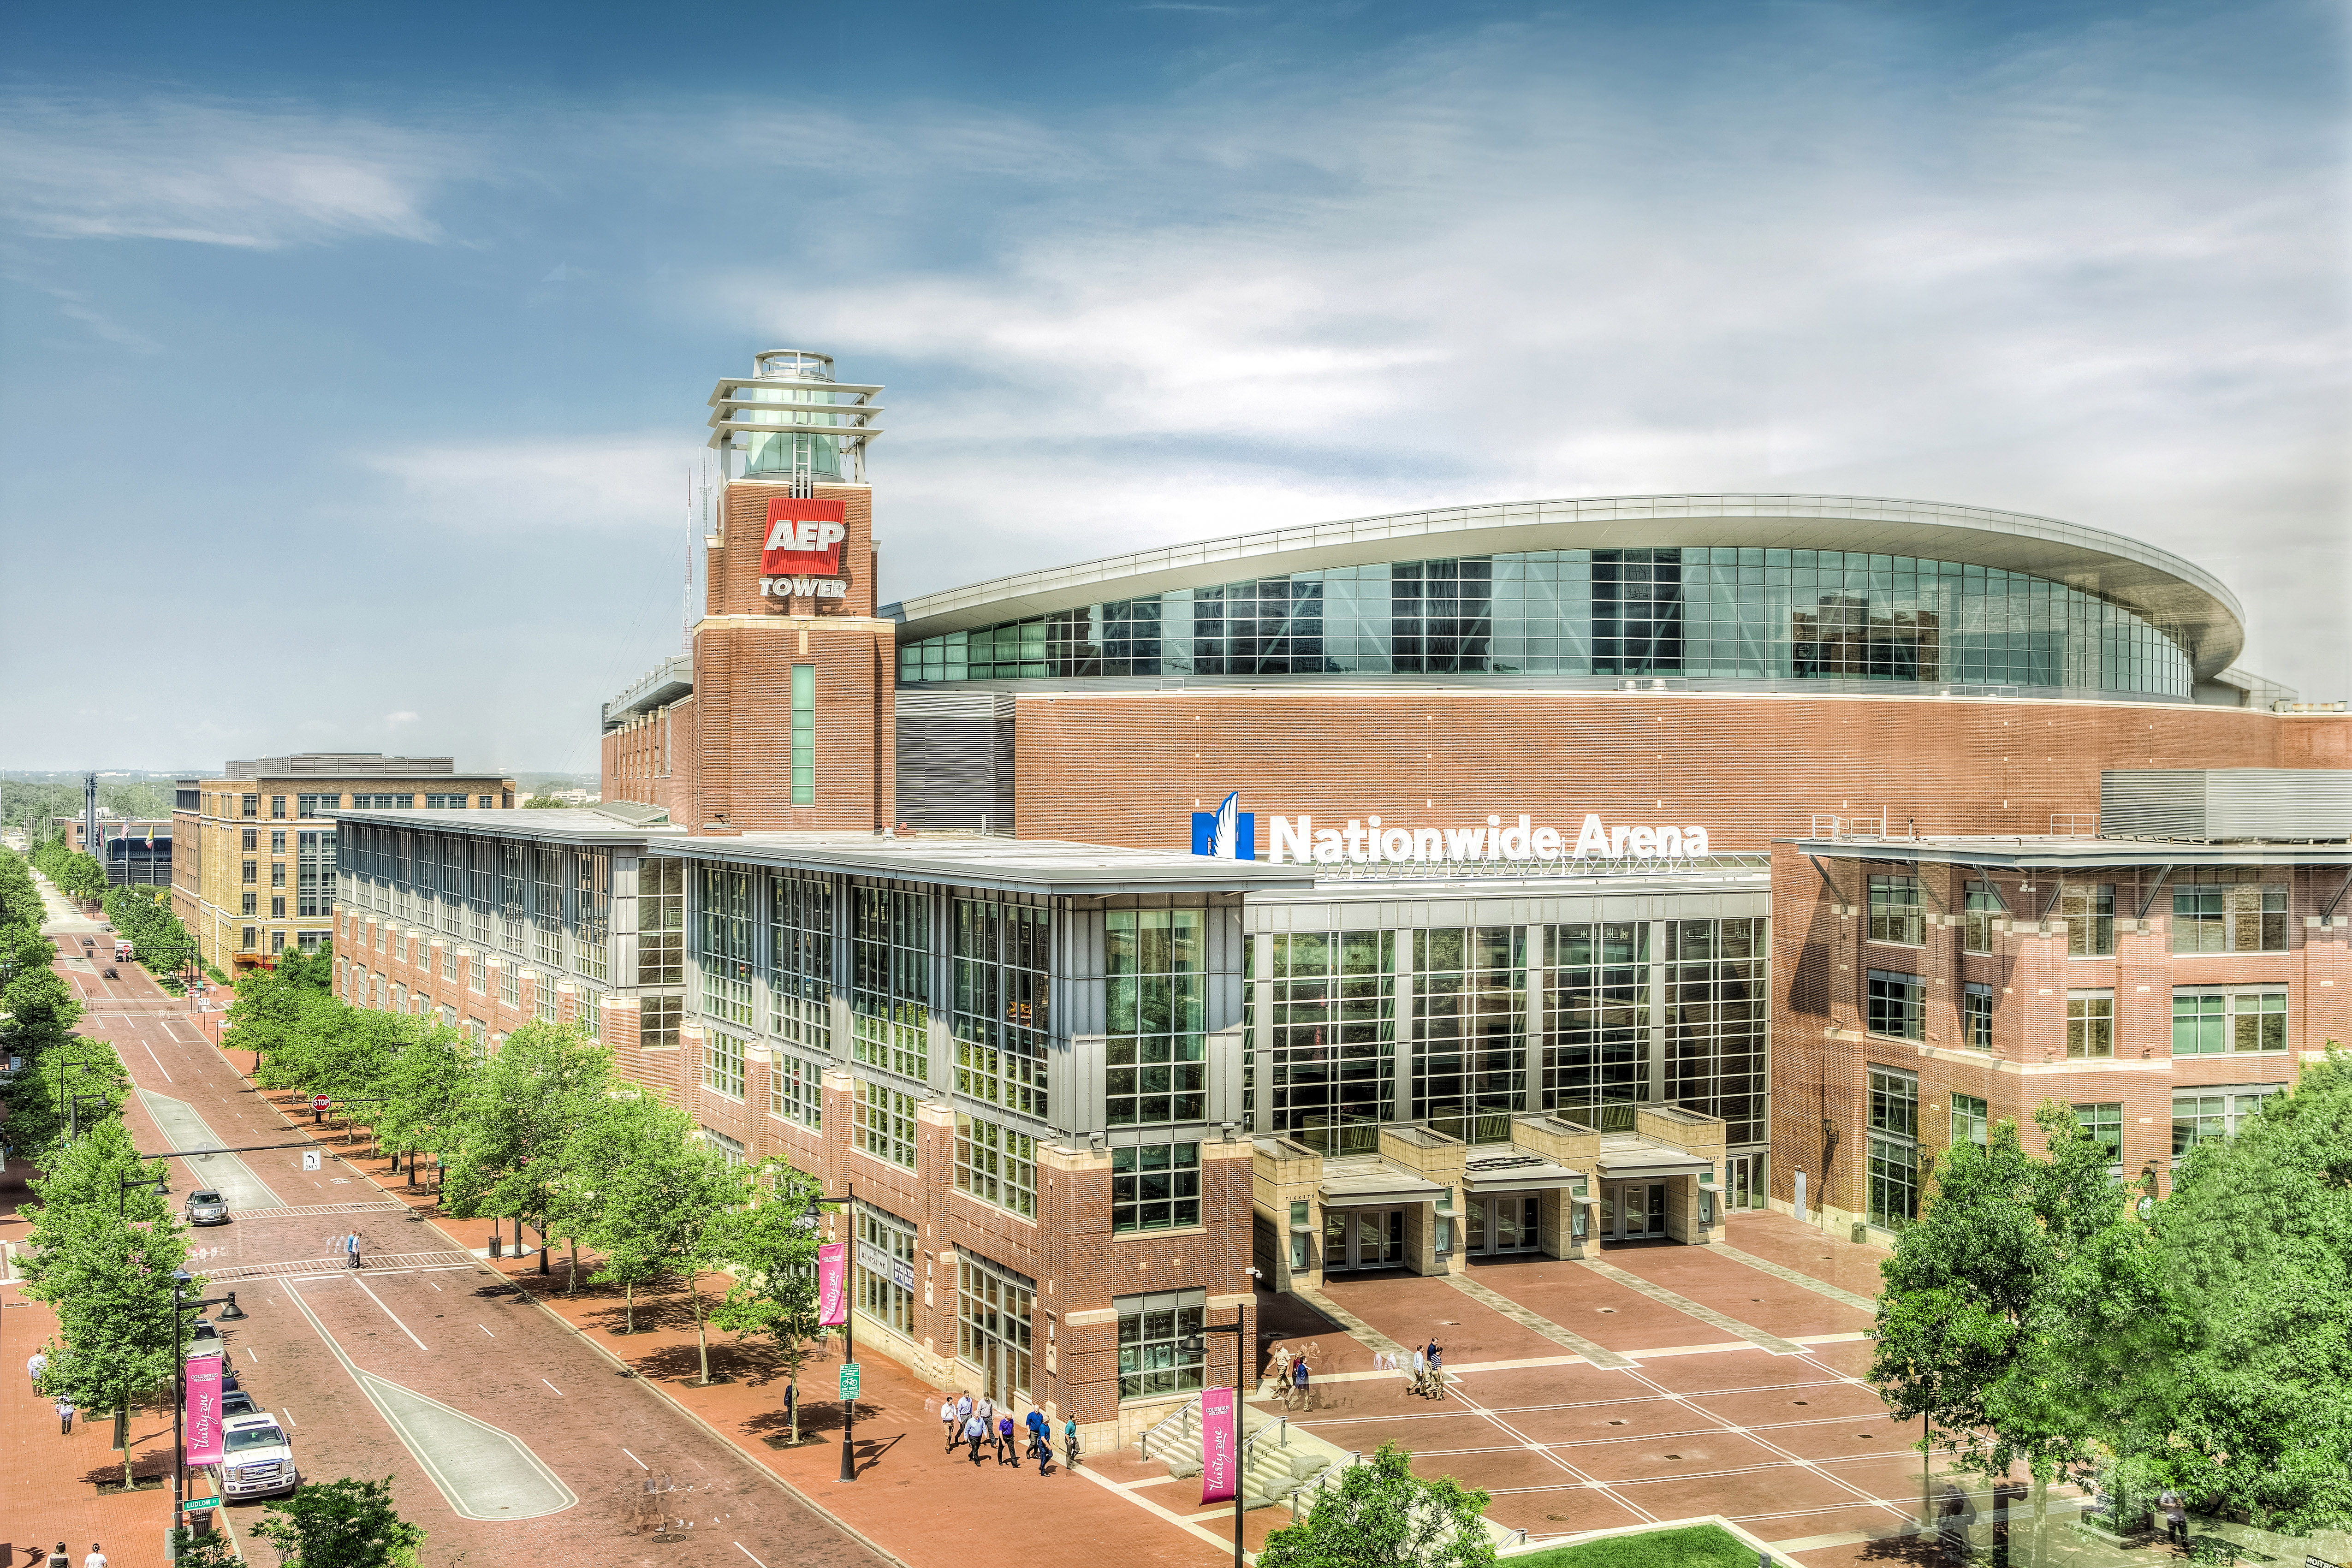 Columbus Blue Jackets Tickets, Packages & Nationwide Arena Hotels